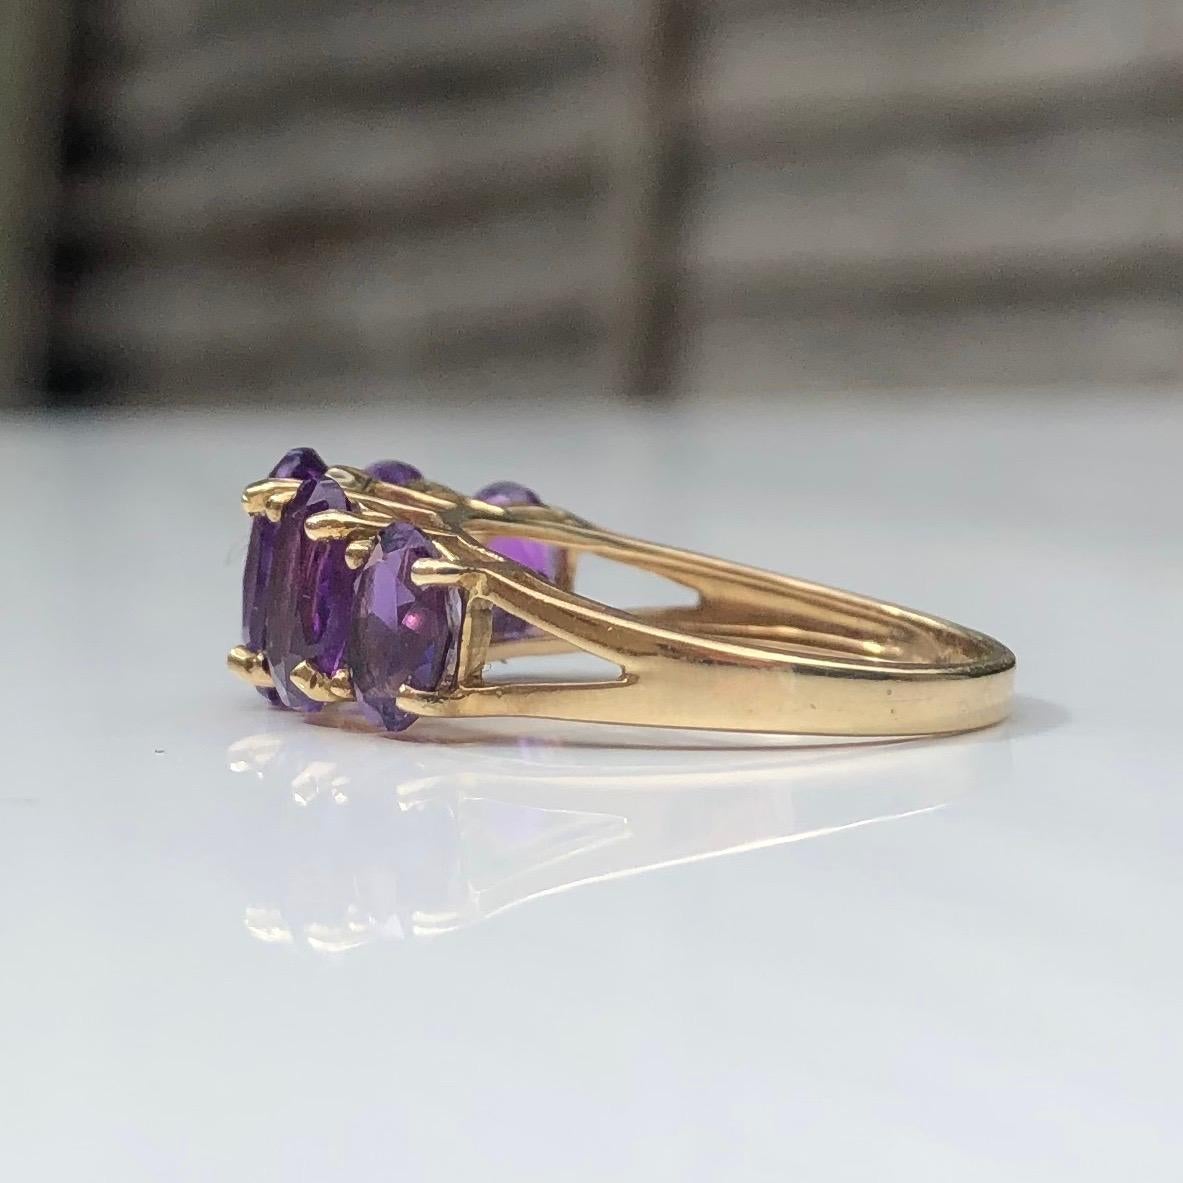 The five bright amethyst stones set in this ring are set up high on a simple openwork gallery. The ring is modelled in 9ct gold and made in Birmingham, England. 

Ring Size: L or 5 3/4
Band Width (widest point): 8mm
Height Off Finger: 6mm

Weight: